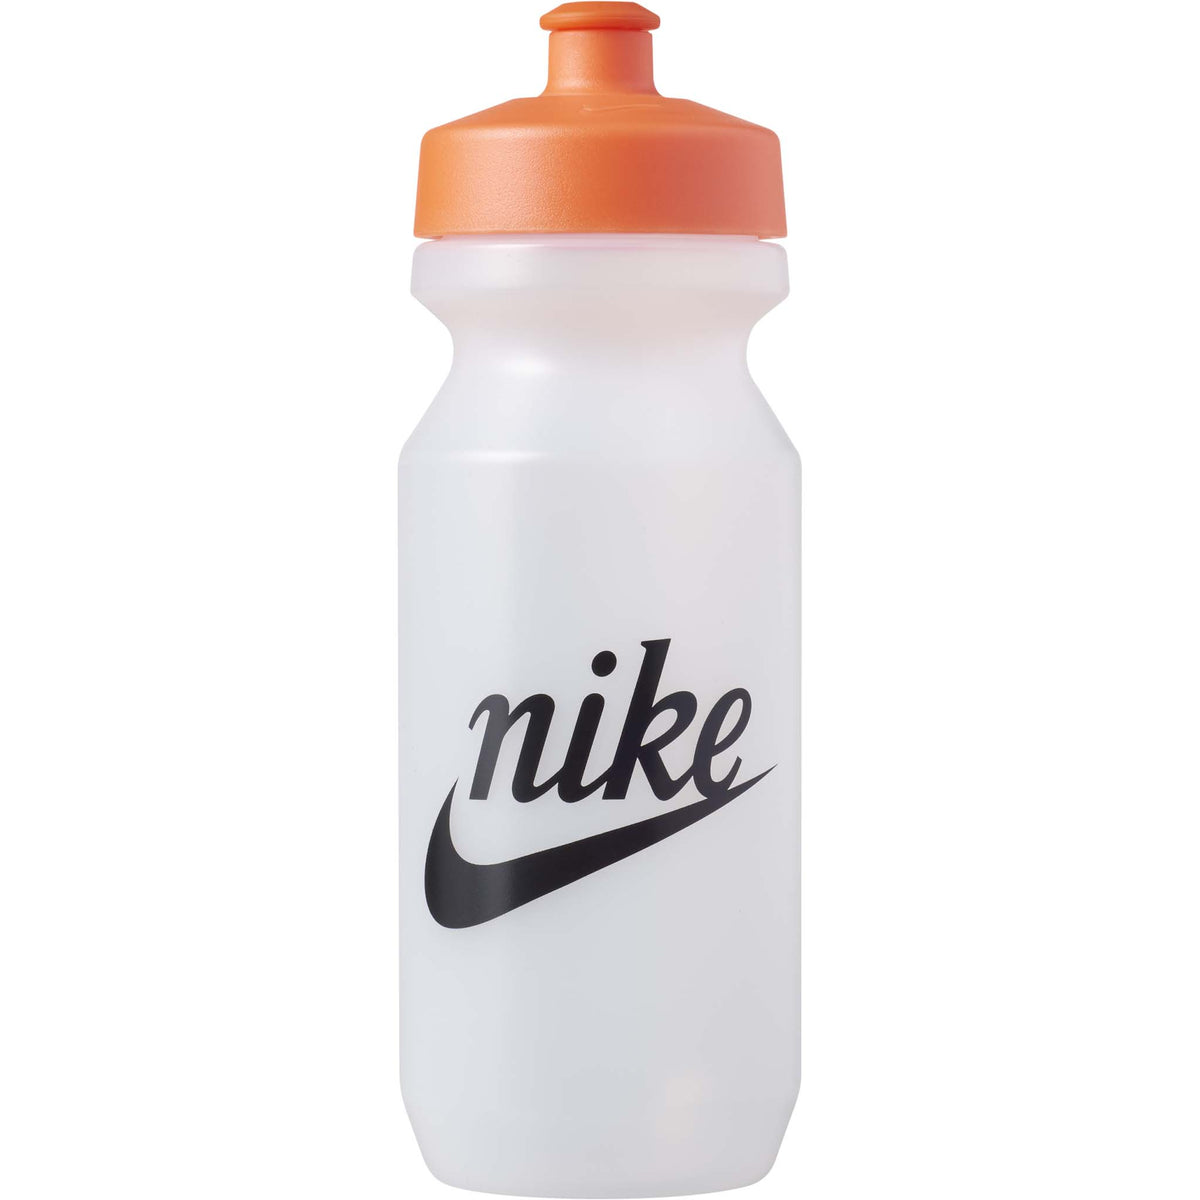 Nike big mouth 2.0 graphic water bottle clear black orange